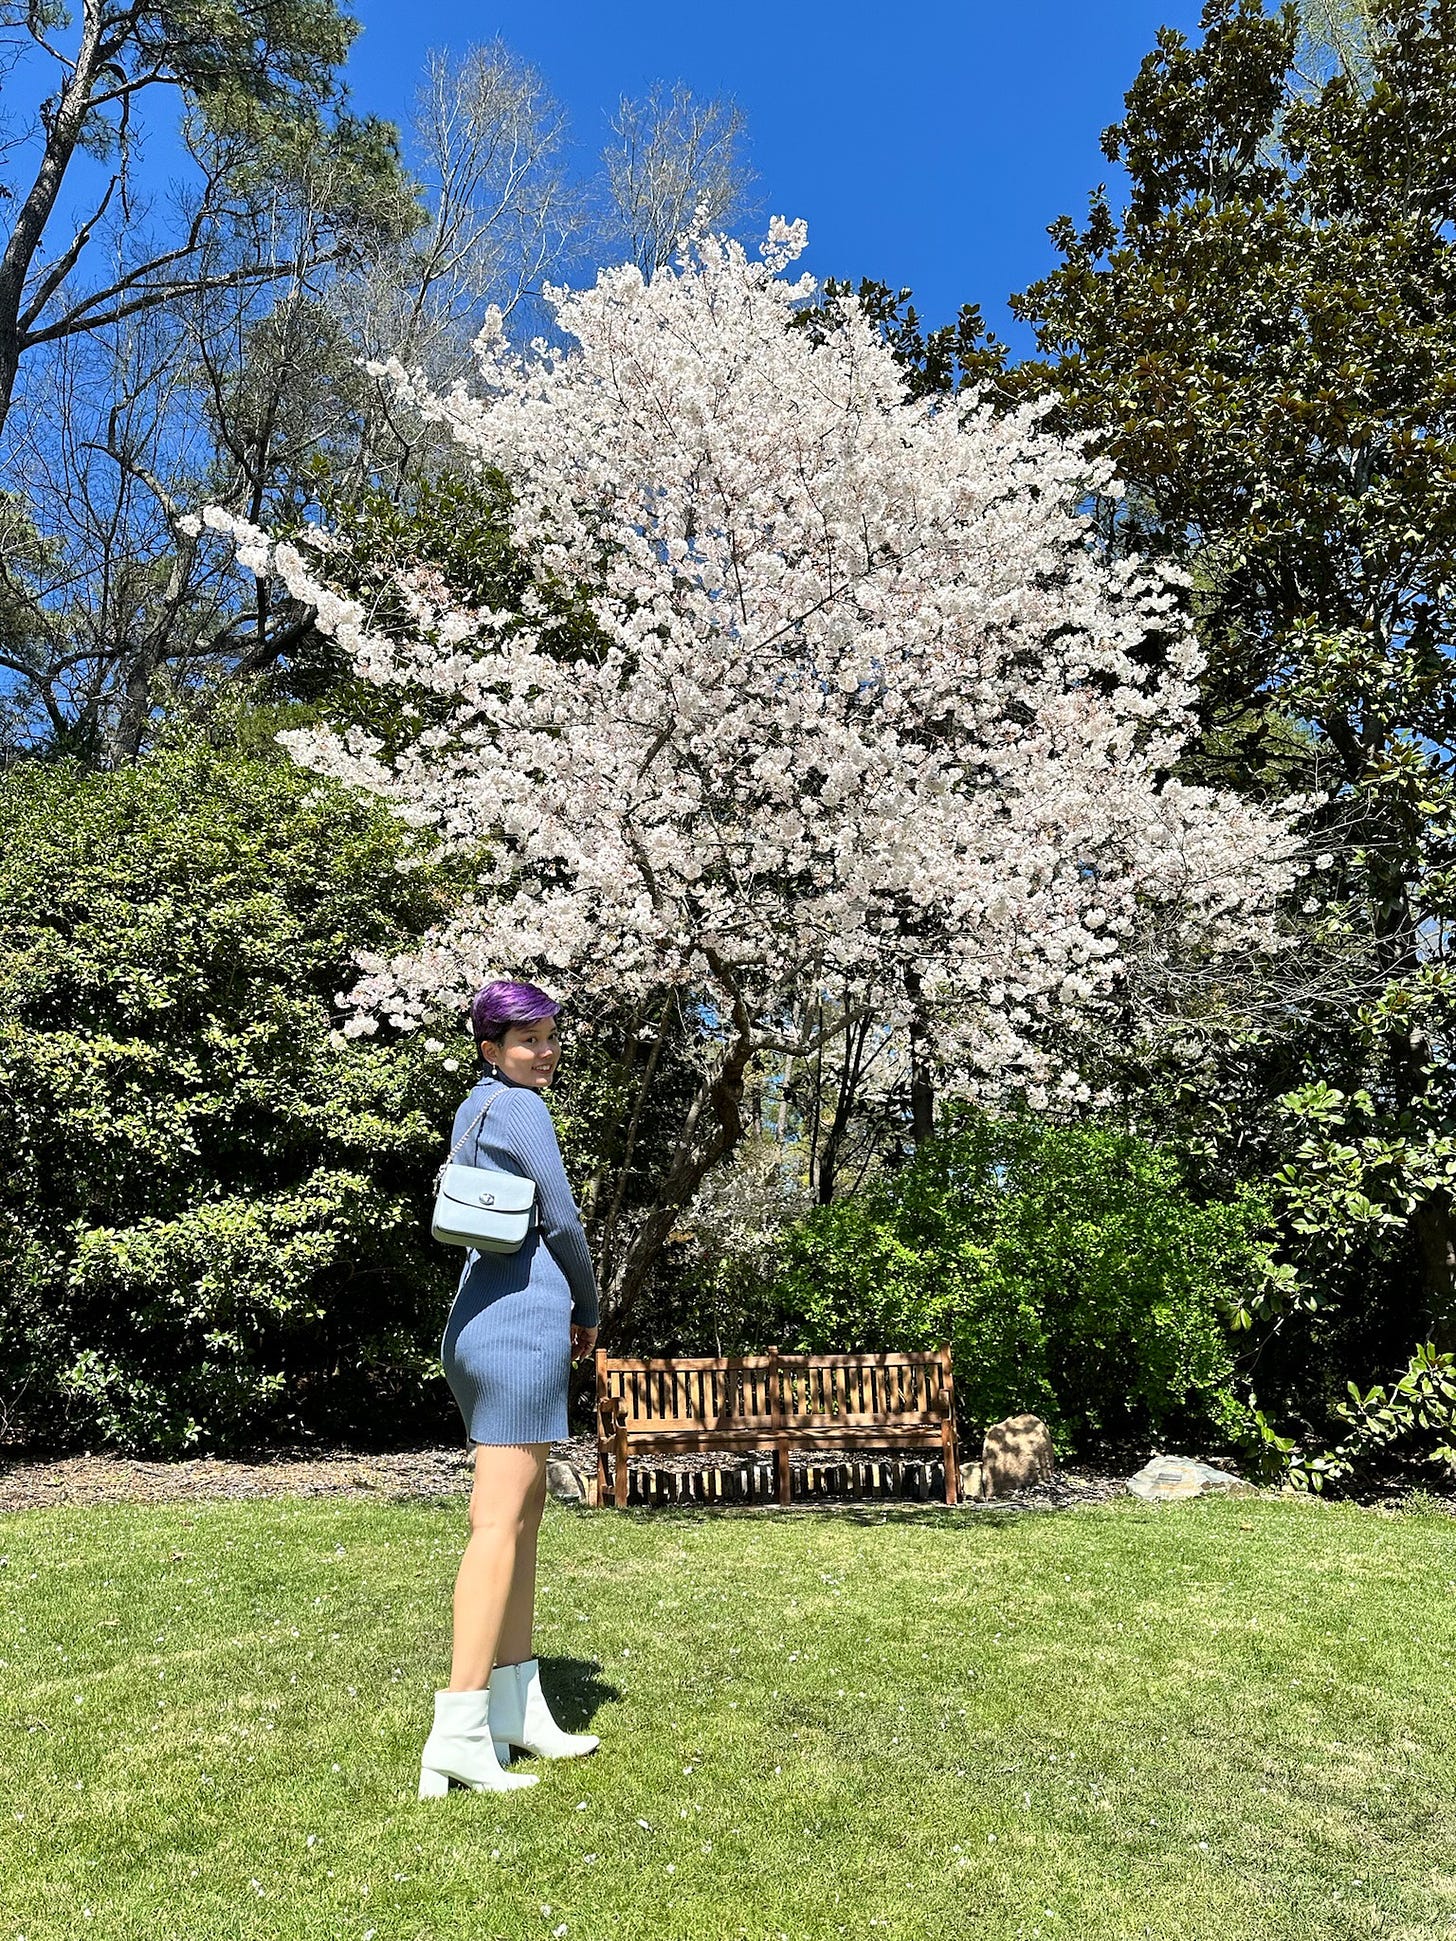 Xin Yi with purple hair, blue dress, white boots, slinging a blue handbag over her shoulder. She is standing in front of a cherry blossom tree in bloom, surrounded by greenery. She is posed facing the tree, turning her head around to face the camera, smiling.